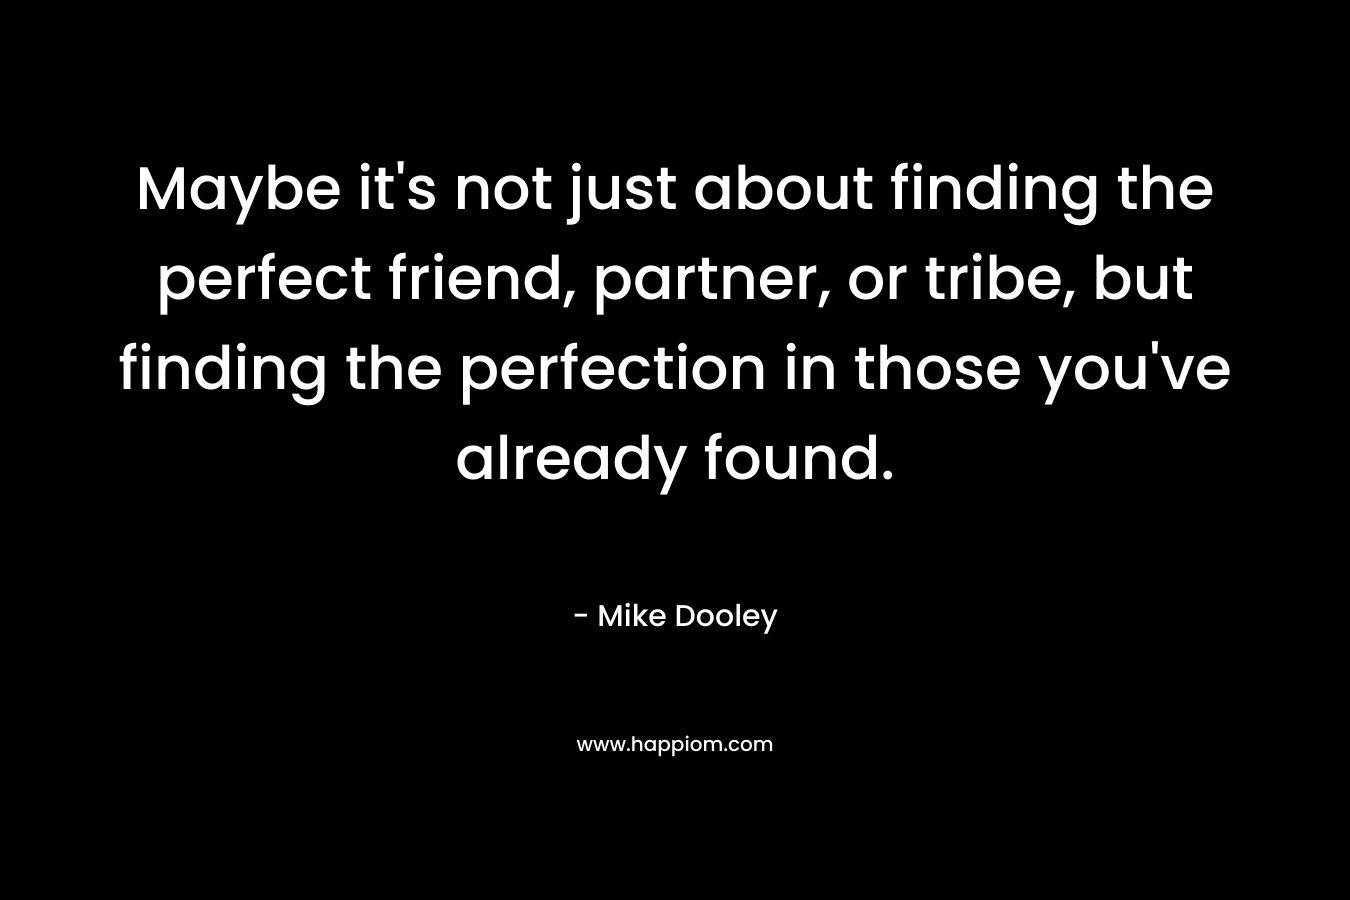 Maybe it's not just about finding the perfect friend, partner, or tribe, but finding the perfection in those you've already found.